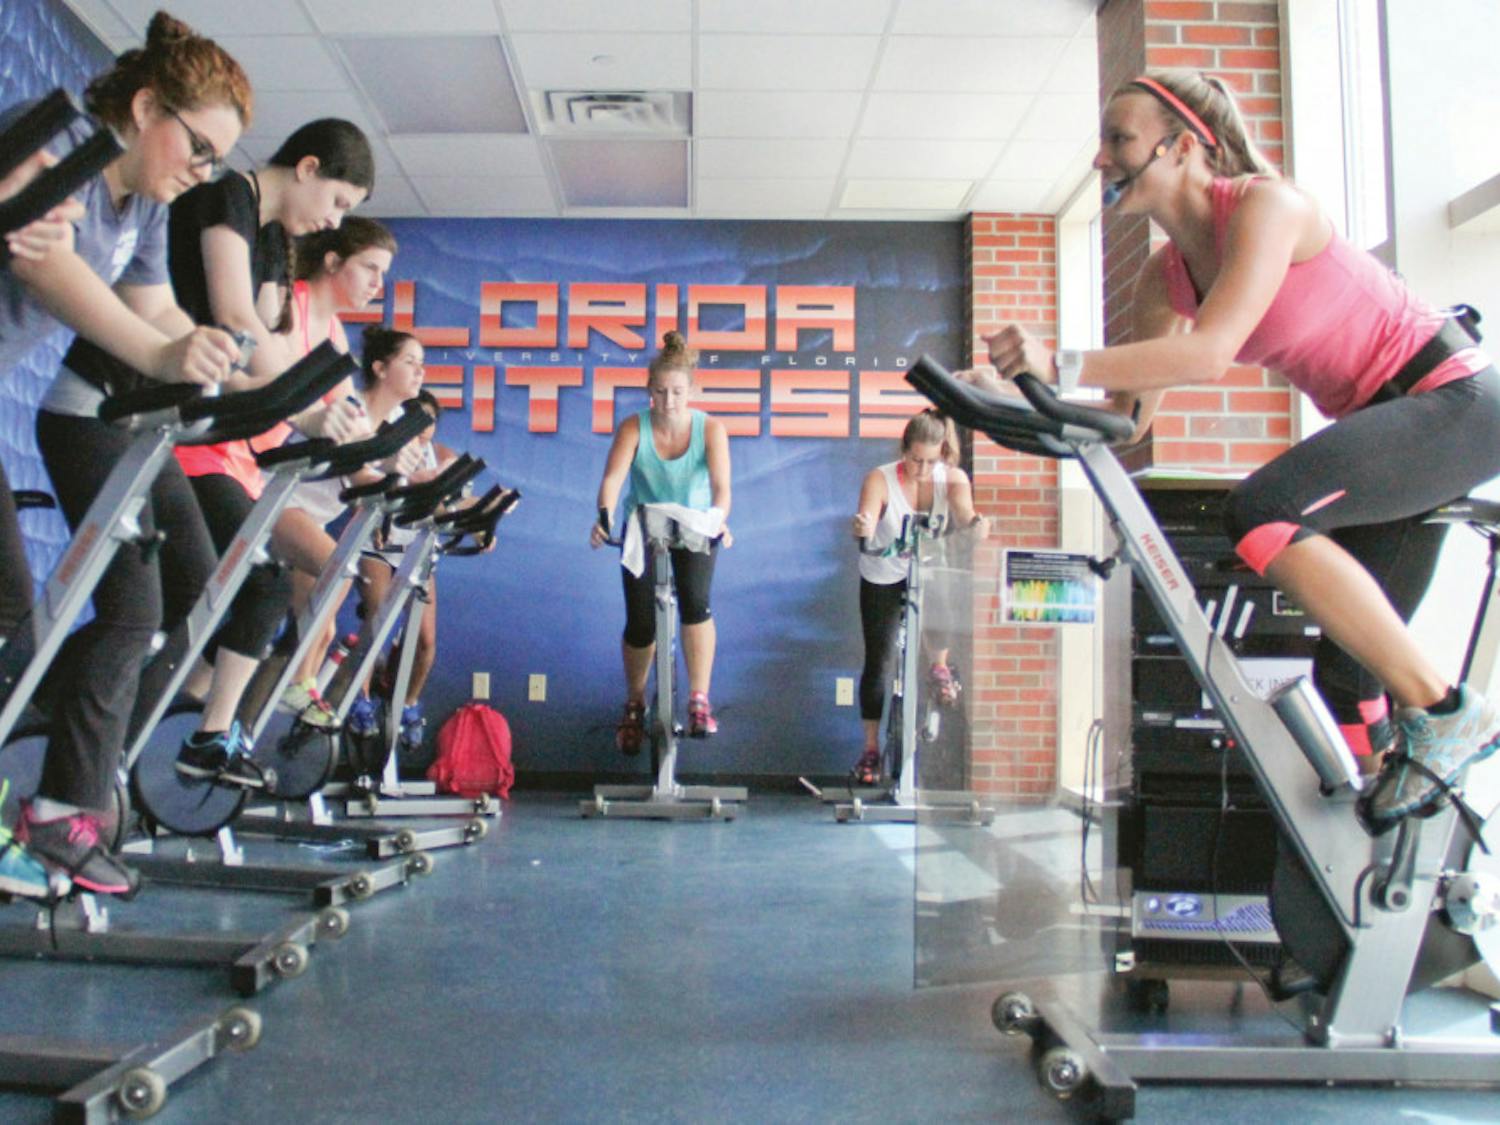 Alyssa Vocelka, a 21-year-old UF accounting senior, leads her Cycle fitness class at the Student Recreation and Fitness Center. Vocelka had Labor Day weekend off and spent it fishing in her hometown of Stuart, Florida. “I caught a giant Snook on the beach,” she said.